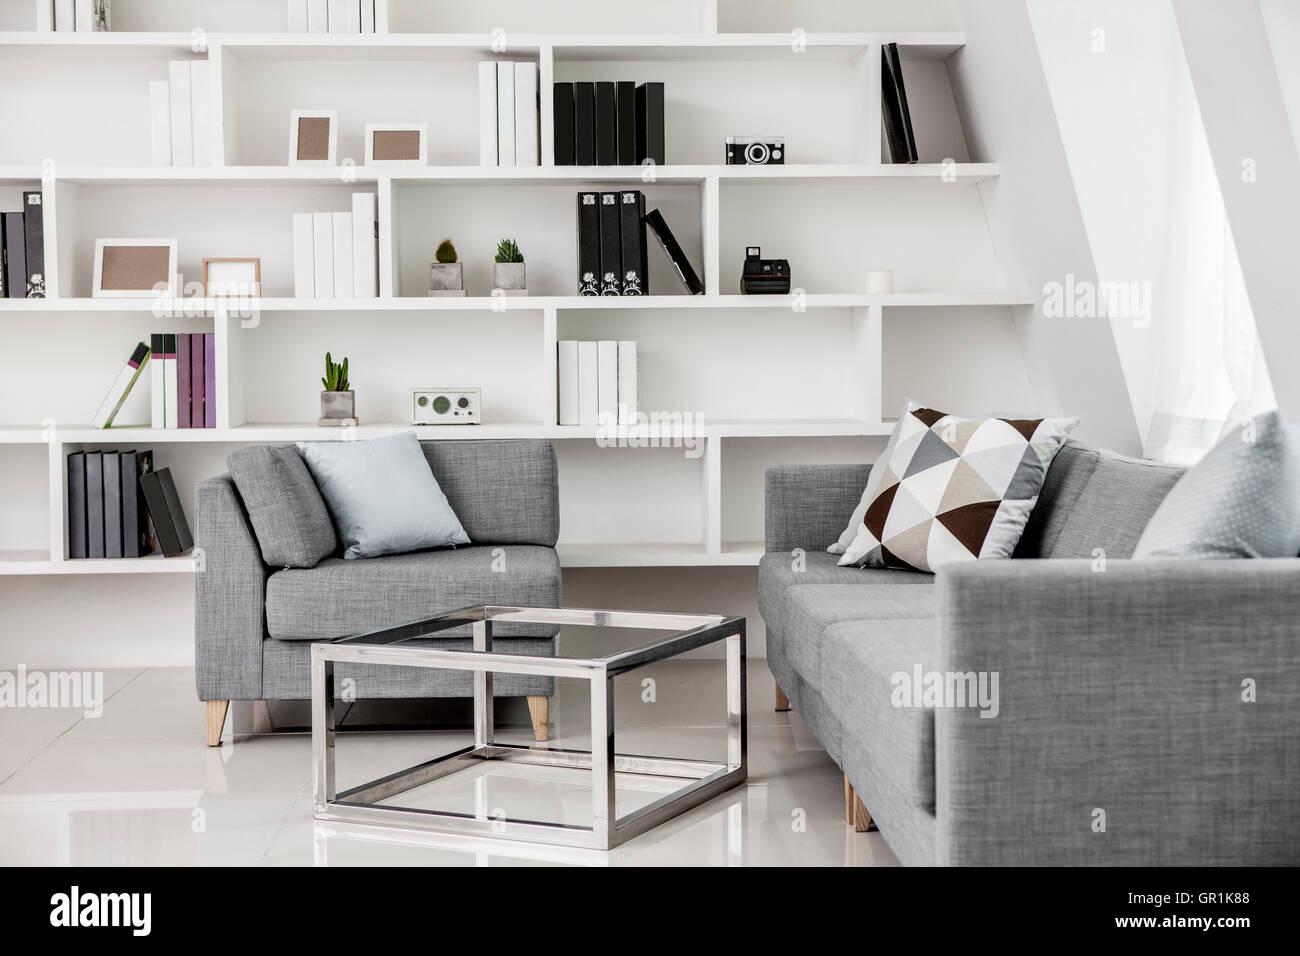 Interior with modern table and sofas against bookcases Stock Photo